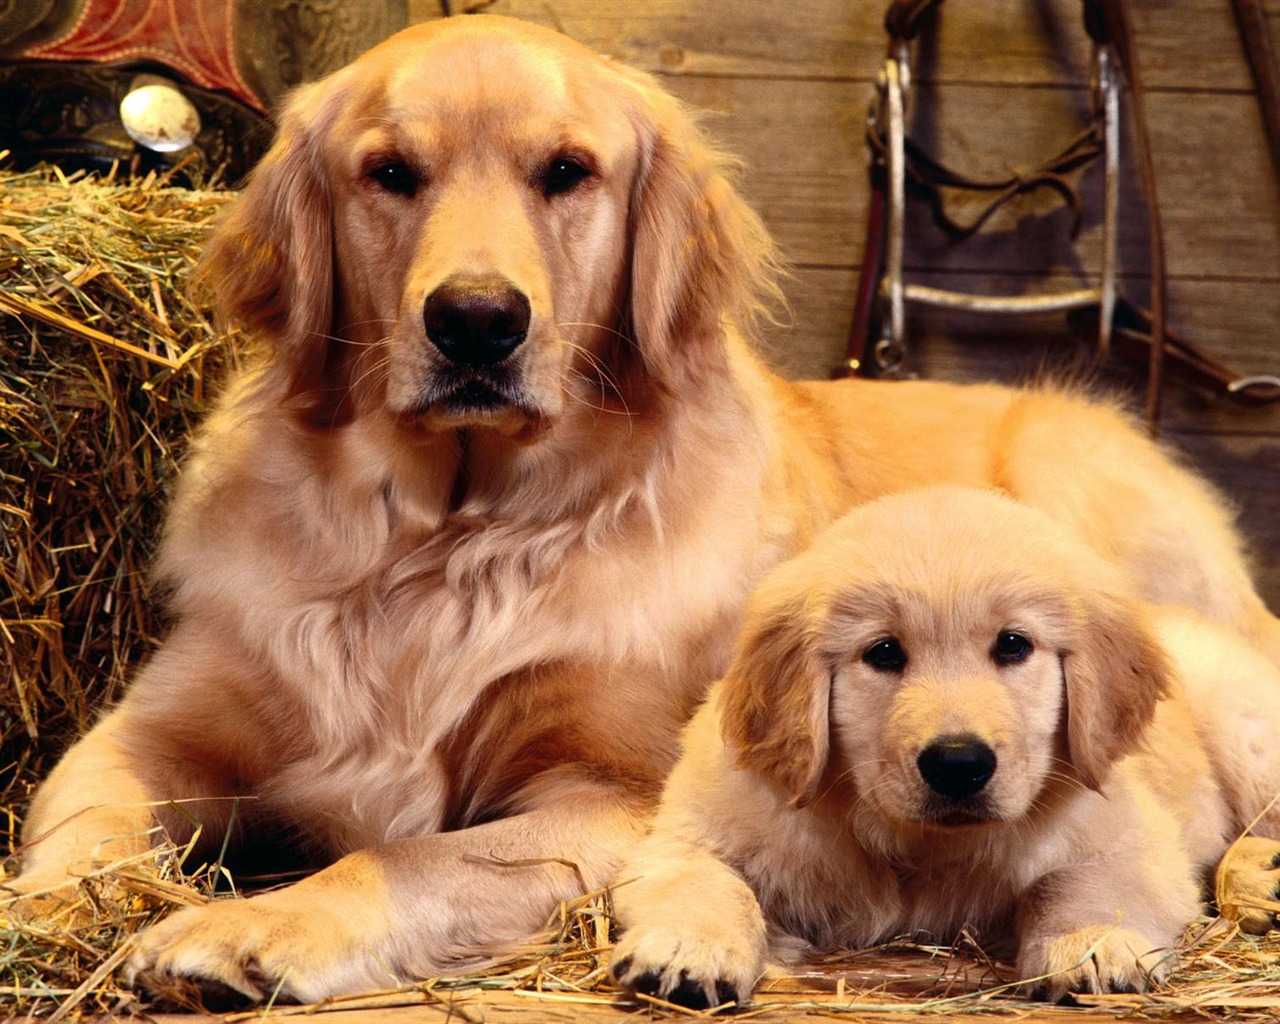 Puppy Photo HD wallpapers (2) #5 - 1280x1024